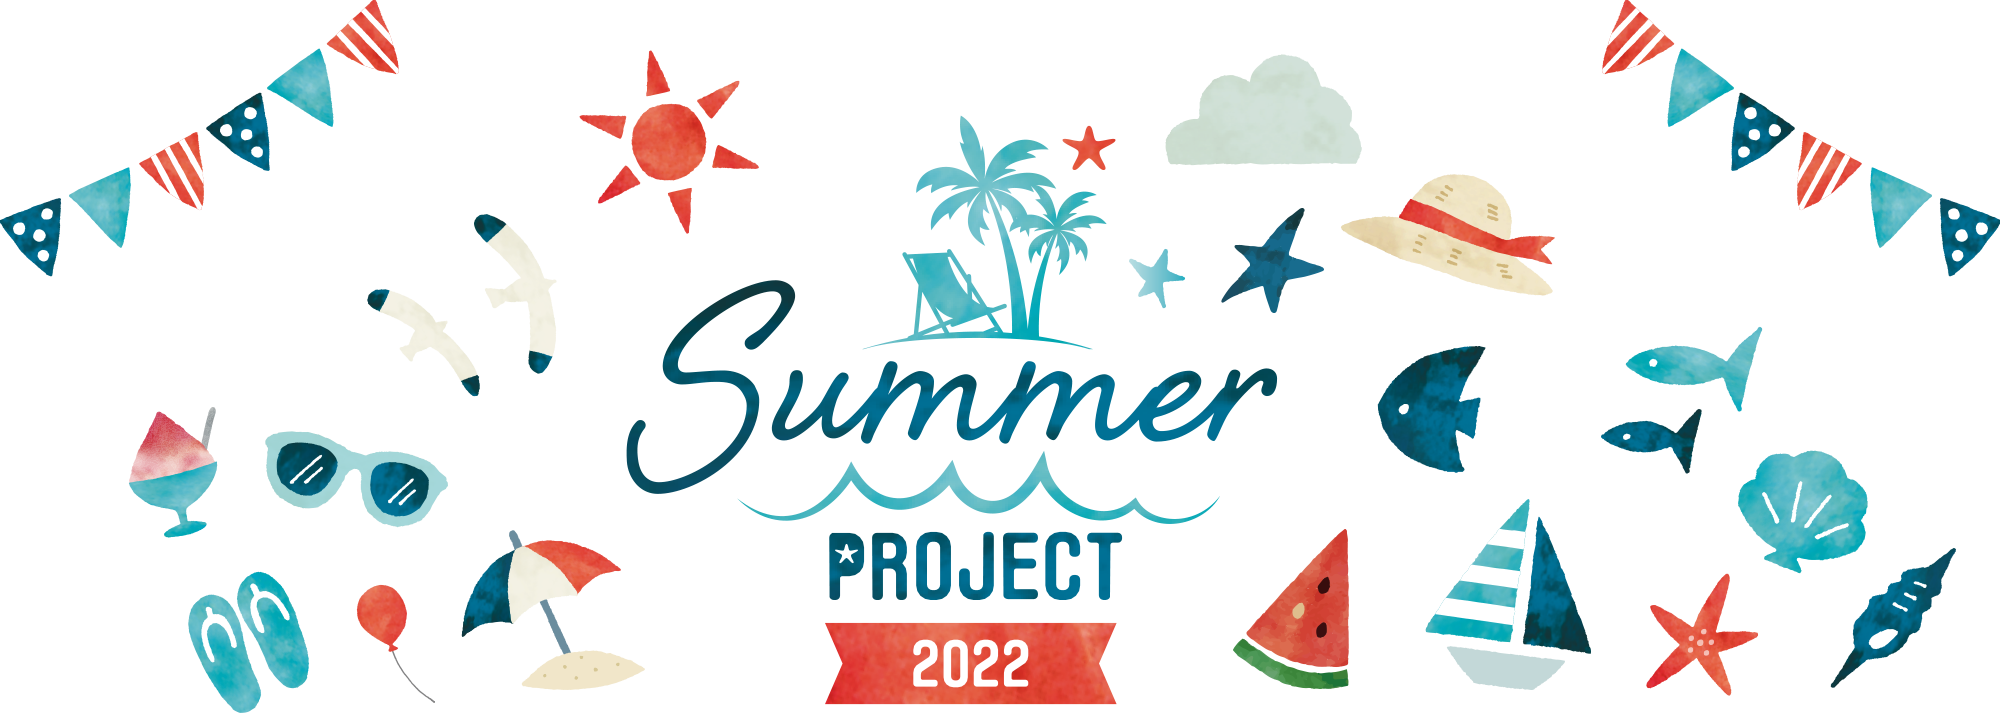 SUMMER PROJECT 2022